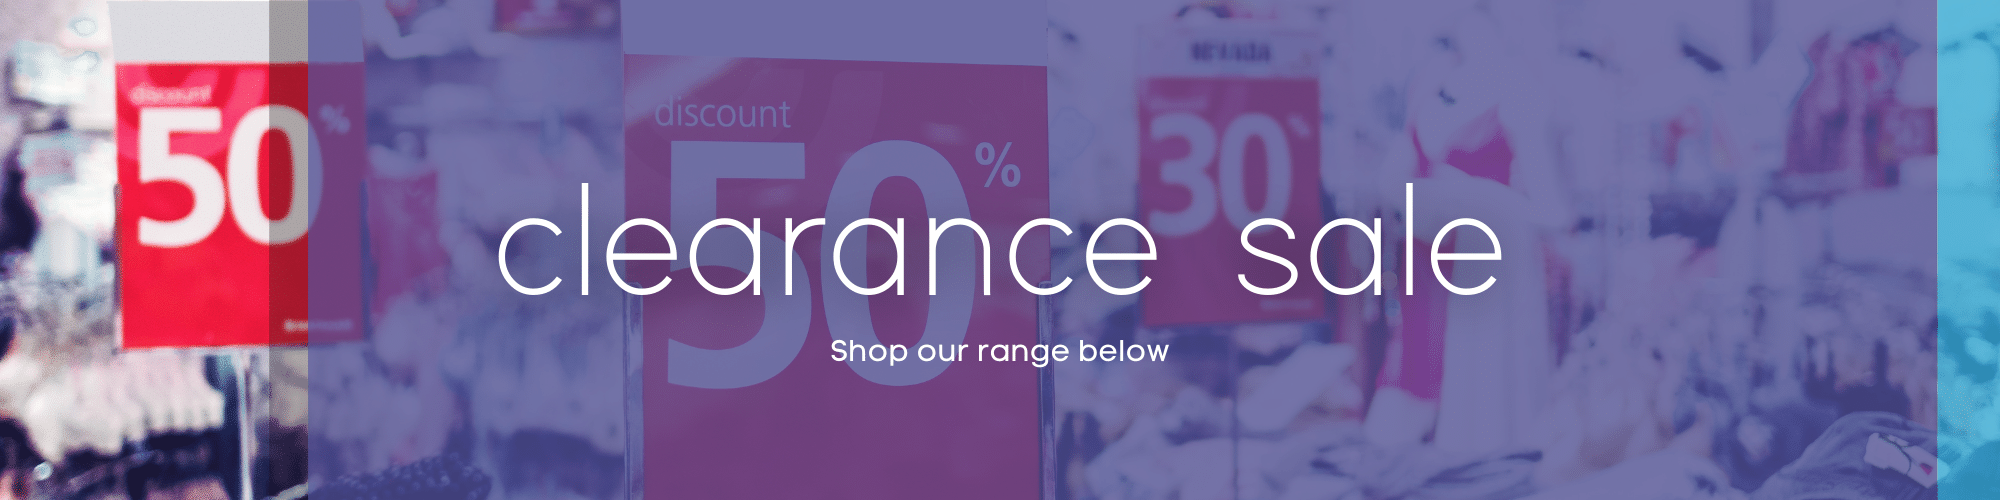 Clearance Sales UK